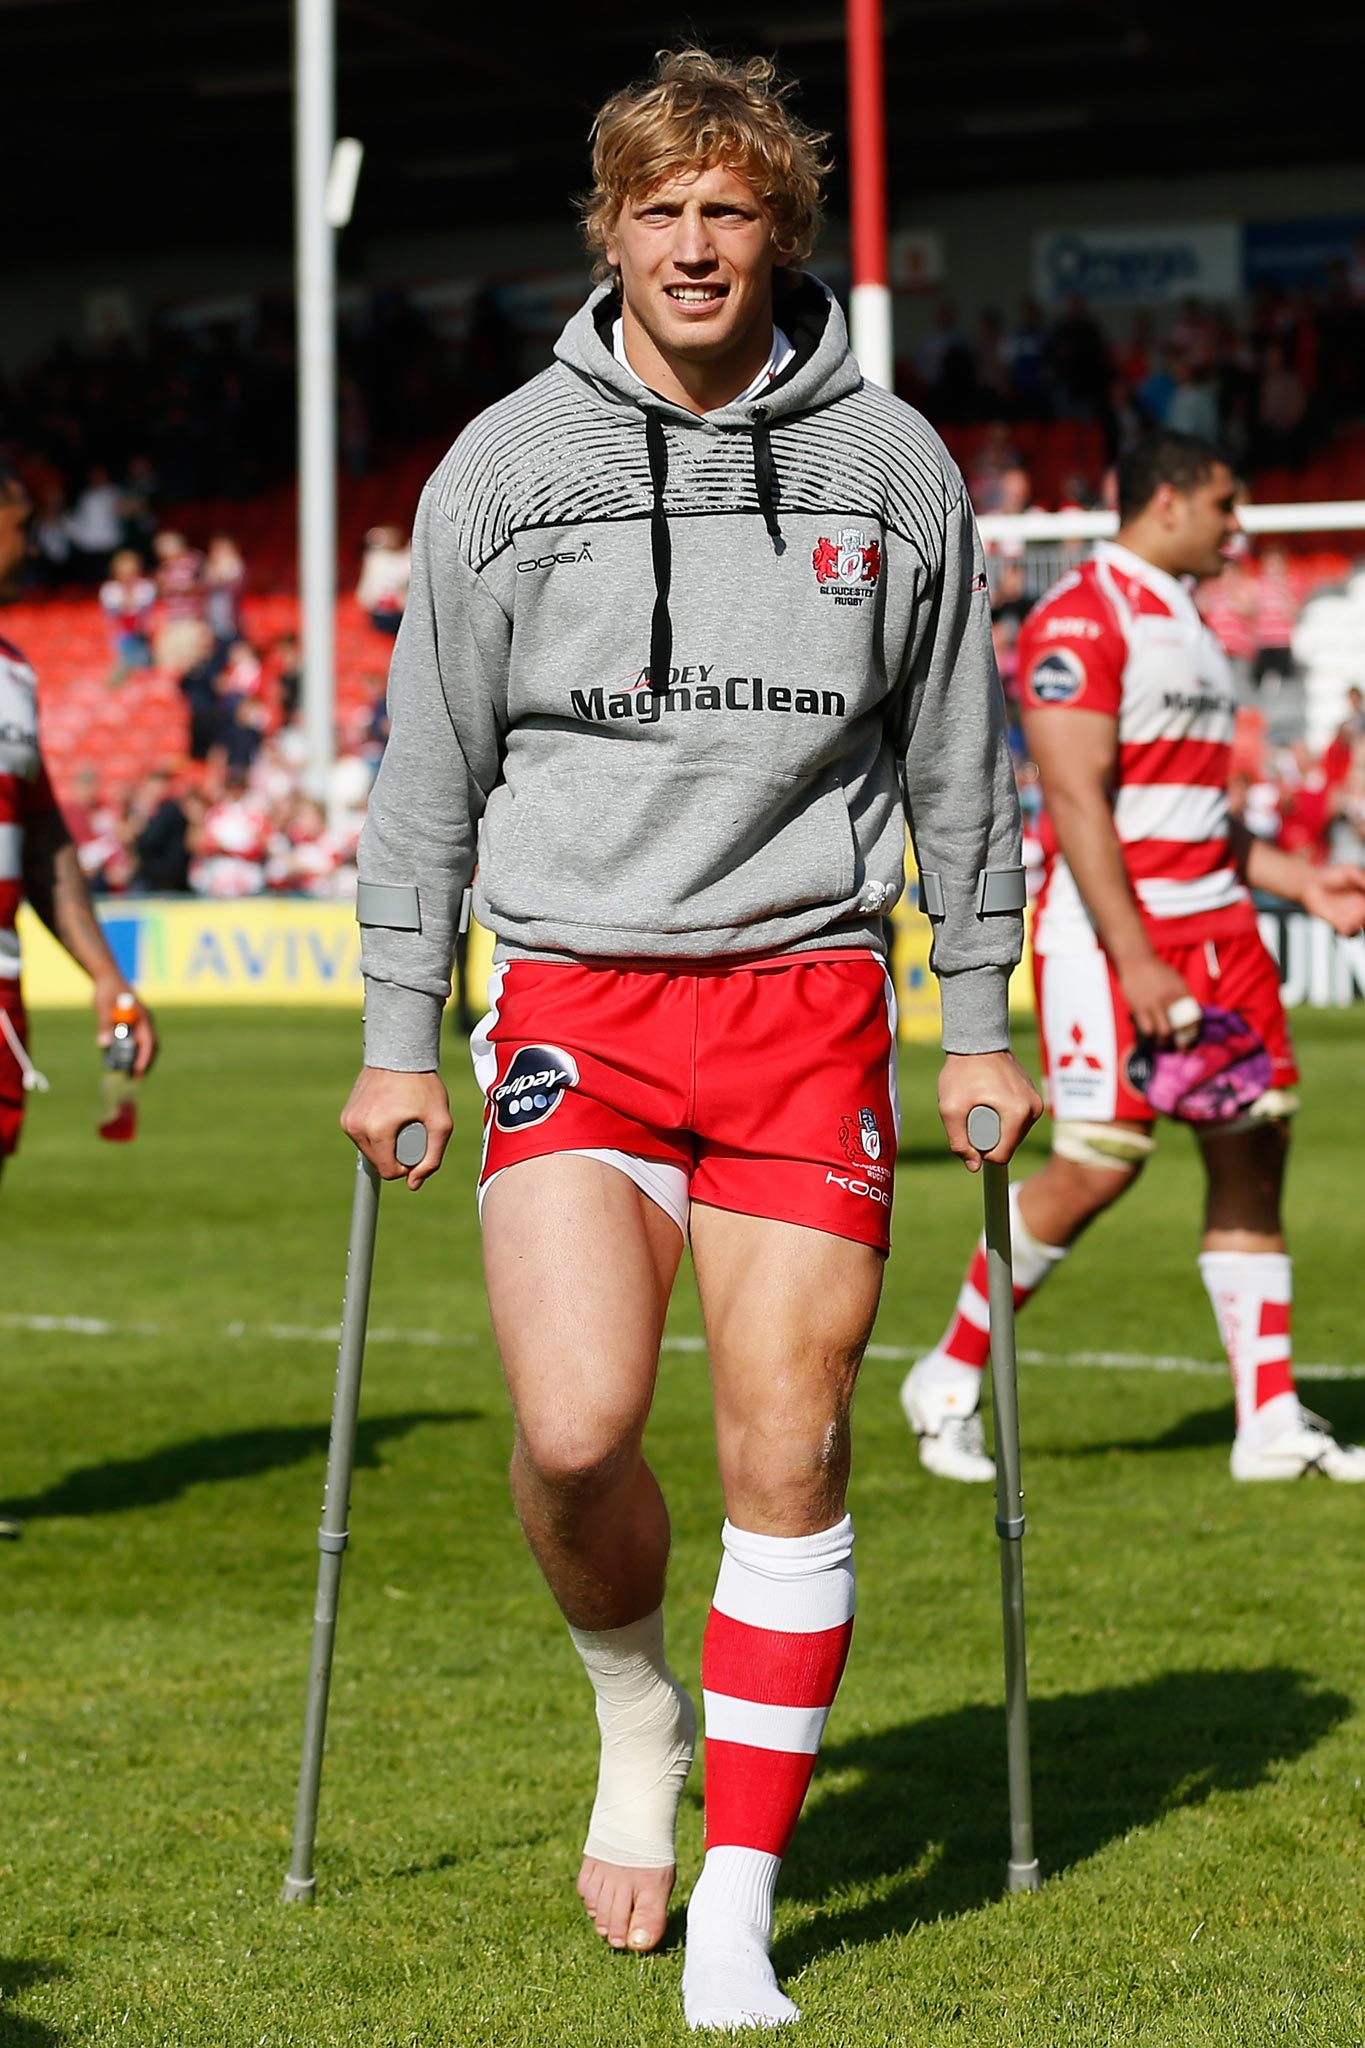 Billy Twelvetrees after injuring his ankle in Gloucester’s league game against London Irish last weekend